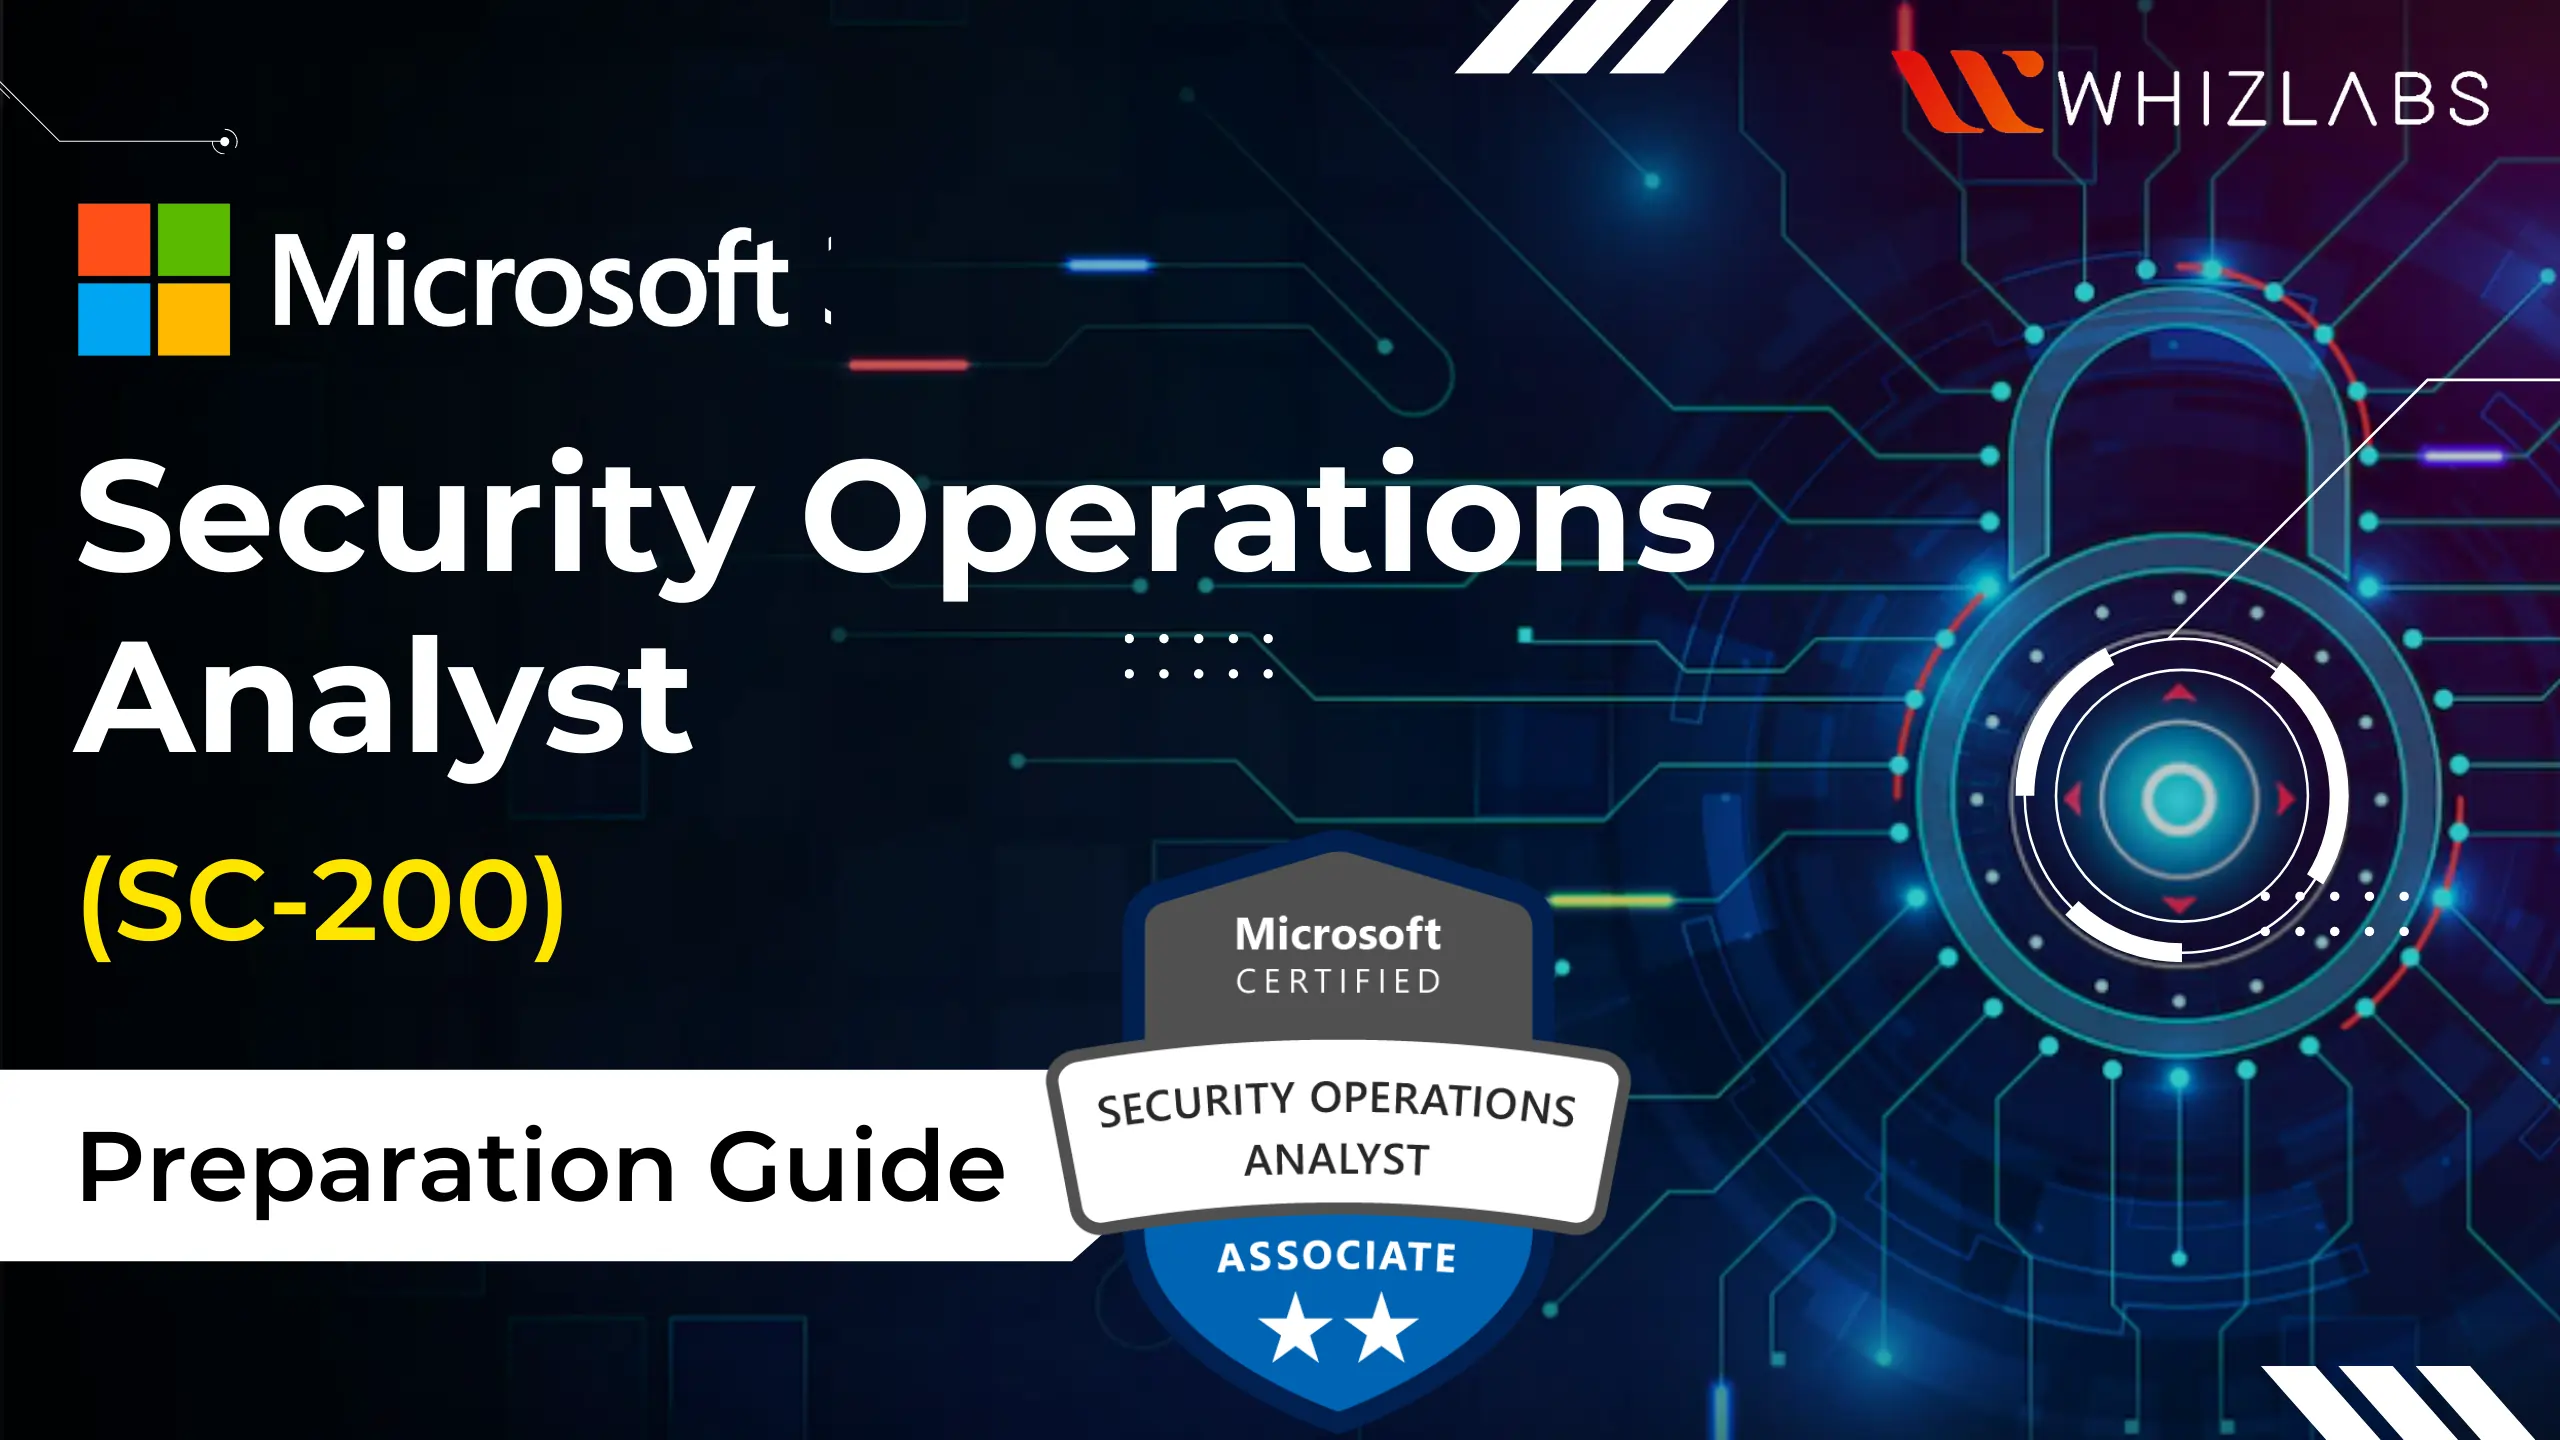 SC-200: Microsoft Security Operations Analyst - Study Guide